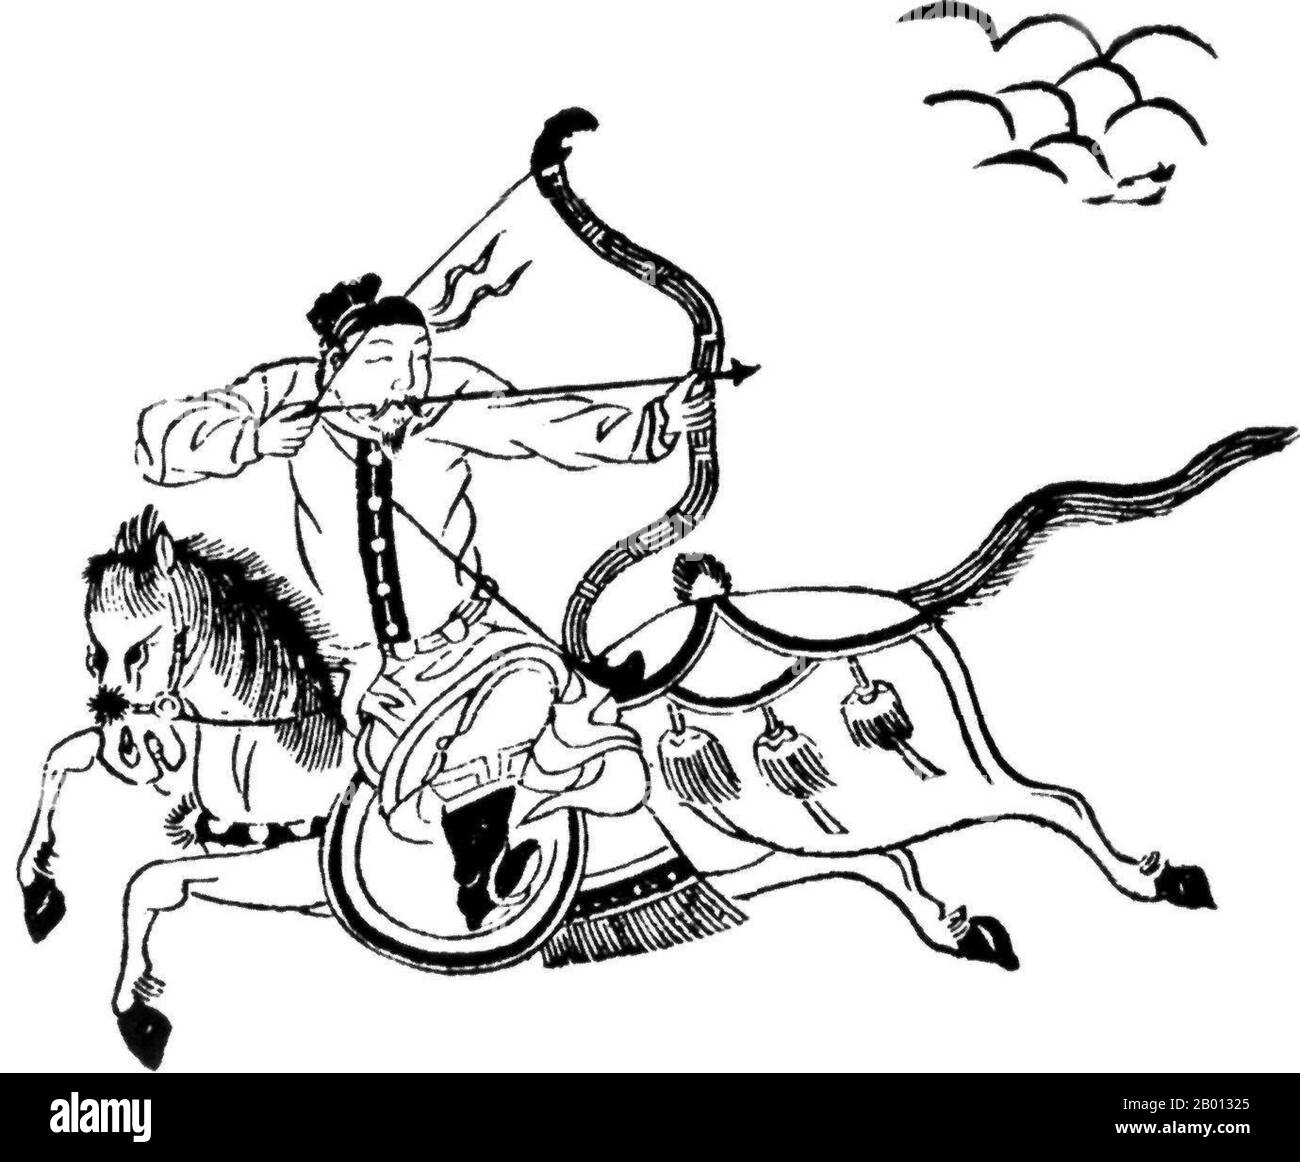 China: Drawing of a mounted archer, Ming Dynasty (1368-1644), 16th century. Stock Photo